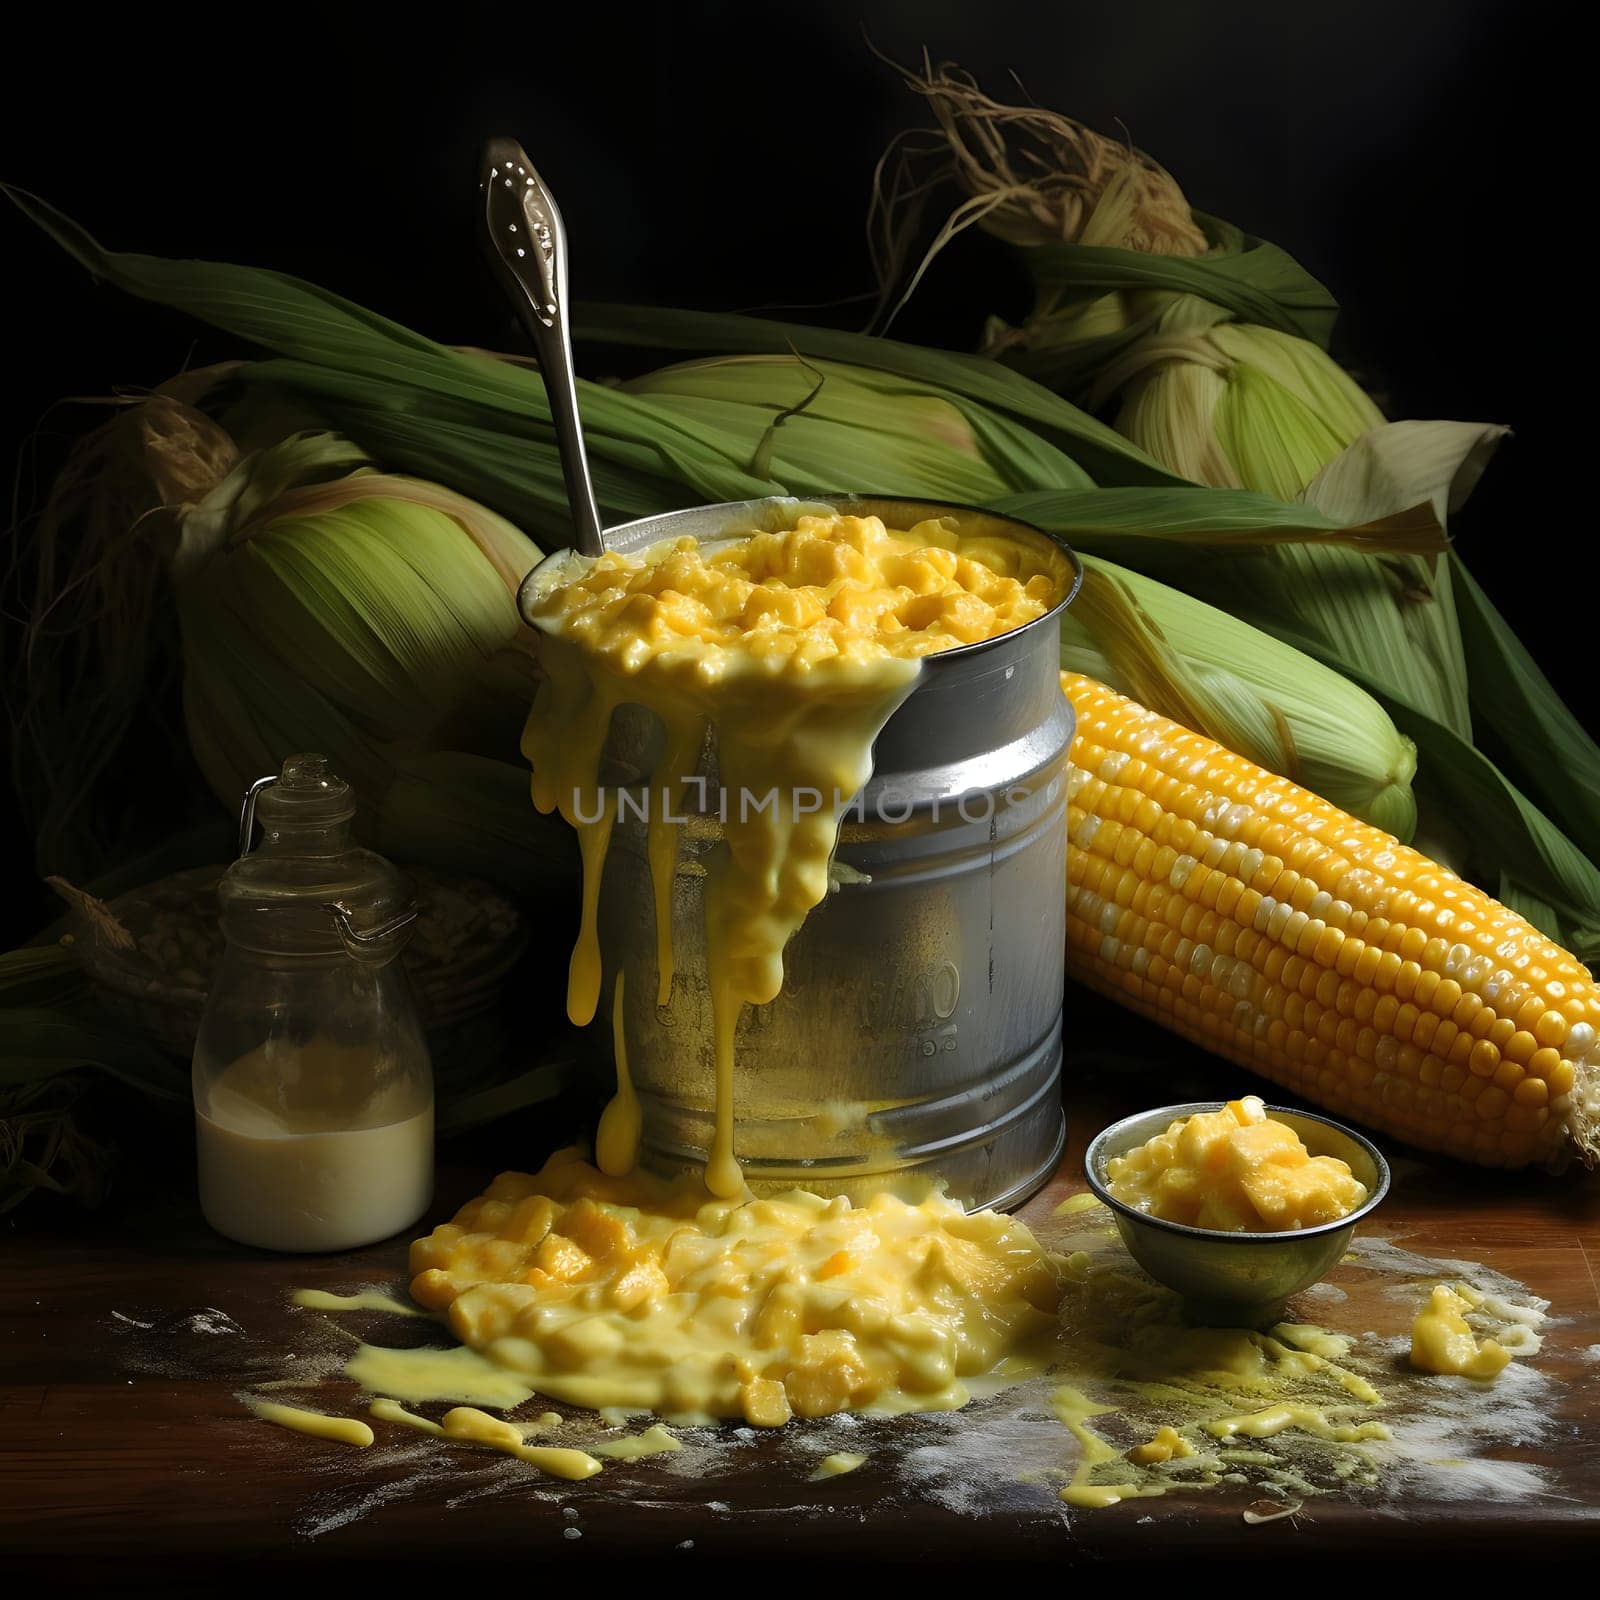 Metal container for corn paste with corn cobs in the background. Corn as a dish of thanksgiving for the harvest. An atmosphere of joy and celebration.